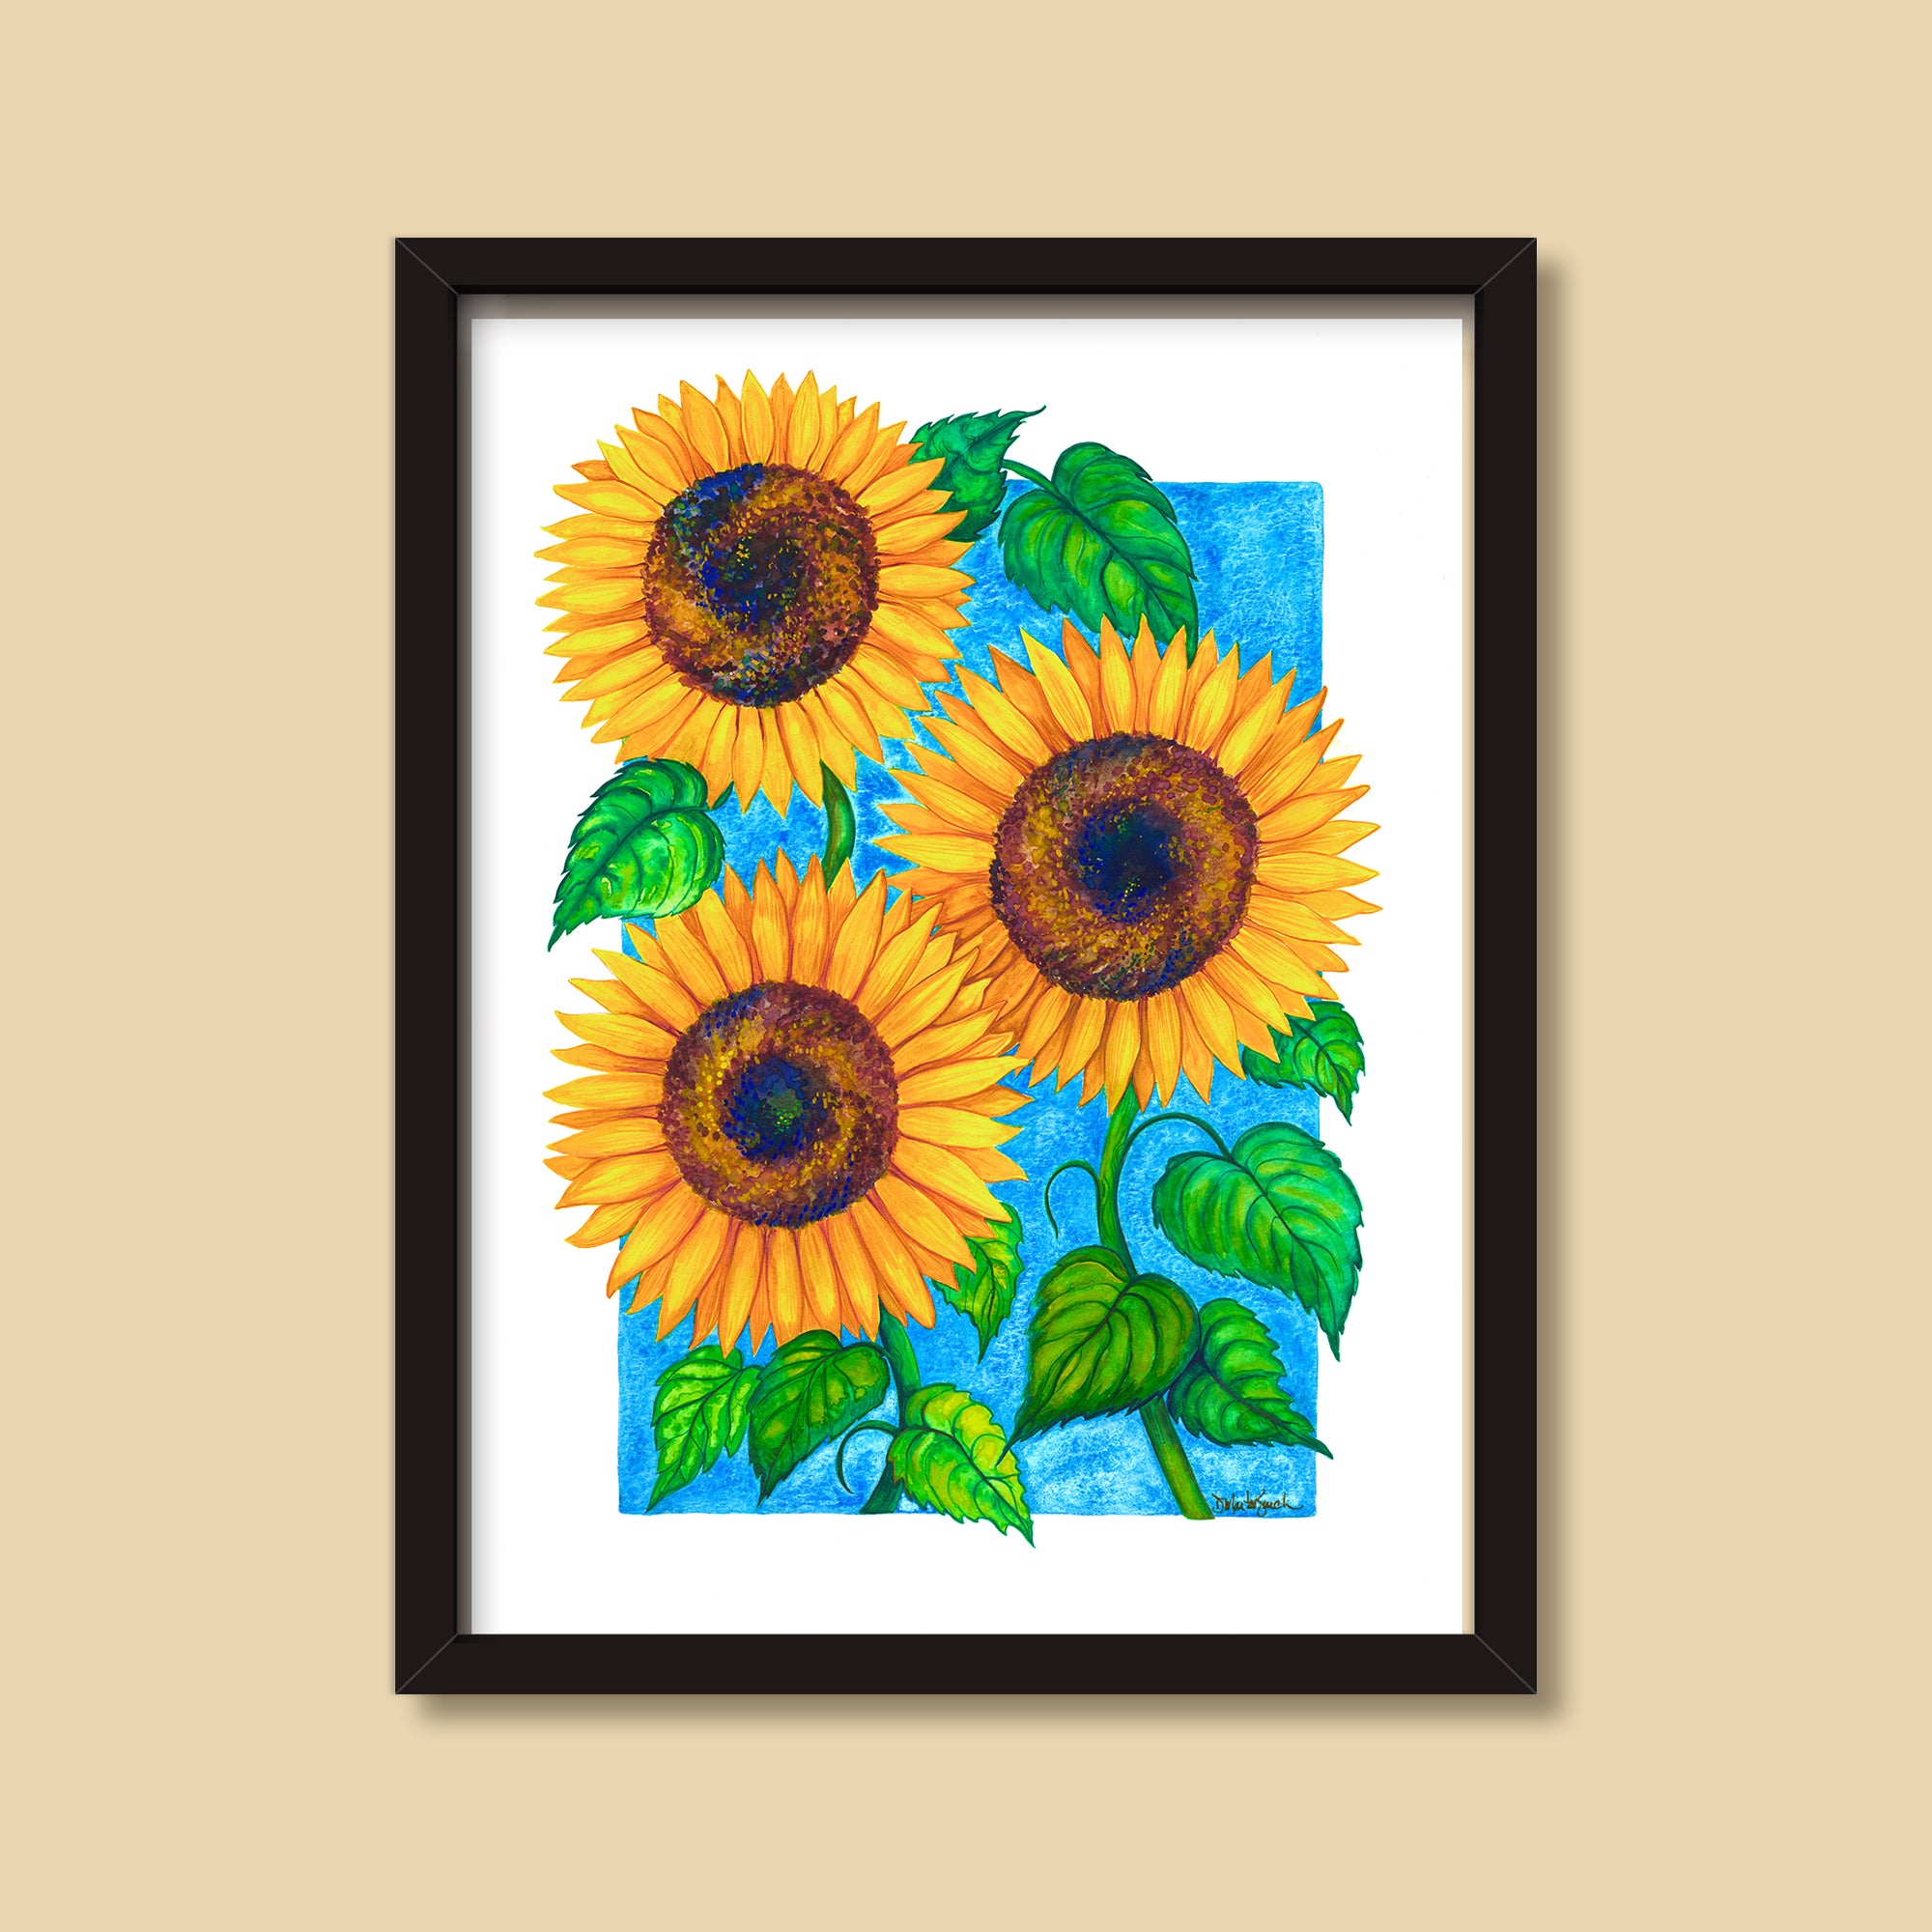 Sunflowers | Watercolor Painting by Denise Marta-Burch